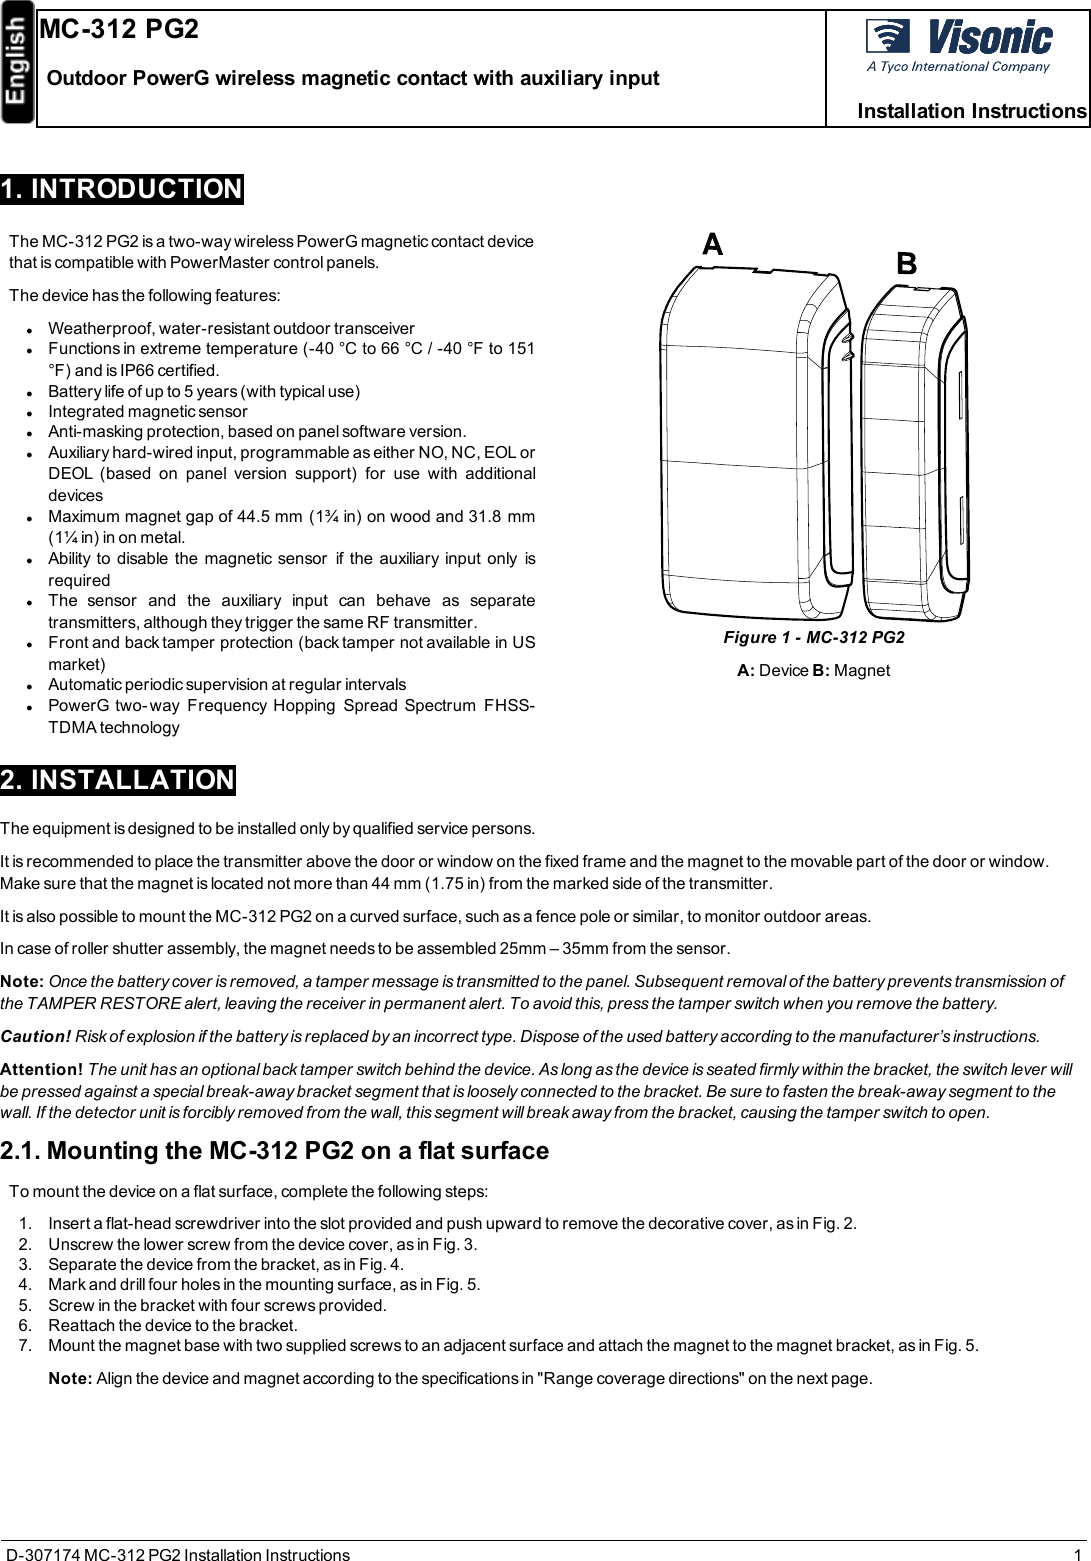 D-307174 MC-312 PG2 Installation Instructions 11. INTRODUCTIONThe MC-312 PG2 is a two-way wireless PowerG magnetic contact devicethat is compatible with PowerMaster control panels.The device has the following features:lWeatherproof, water-resistant outdoor transceiverlFunctions in extreme temperature (-40 °C to 66 °C / -40 °F to 151°F) and is IP66 certified.lBattery life of up to 5 years (with typical use)lIntegrated magnetic sensorlAnti-masking protection, based on panel software version.lAuxiliary hard-wired input, programmable as either NO, NC, EOL orDEOL (based on panel version support) for use with additionaldeviceslMaximum magnet gap of 44.5 mm (1¾ in) on wood and 31.8 mm(1¼ in) in on metal.lAbility to disable the magnetic sensor if the auxiliary input only isrequiredlThe sensor and the auxiliary input can behave as separatetransmitters, although they trigger the same RF transmitter.lFront and back tamper protection (back tamper not available in USmarket)lAutomatic periodic supervision at regular intervalslPowerG two- way Frequency Hopping Spread Spectrum FHSS-TDMA technologyFigure 1- MC-312 PG2A: Device B:Magnet2. INSTALLATIONThe equipment is designed to be installed only by qualified service persons.It is recommended to place the transmitter above the door or window on the fixed frame and the magnet to the movable part of the door or window.Make sure that the magnet is located not more than 44 mm (1.75 in) from the marked side of the transmitter.It is also possible to mount the MC-312 PG2 on a curved surface, such as a fence pole or similar, to monitor outdoor areas.In case of roller shutter assembly, the magnet needs to be assembled 25mm – 35mm from the sensor.Note: Once the battery cover is removed, a tamper message is transmitted to the panel. Subsequent removal of the battery prevents transmission ofthe TAMPER RESTORE alert, leaving the receiver in permanent alert. To avoid this, press the tamper switch when you remove the battery.Caution! Risk of explosion if the battery is replaced by an incorrect type. Dispose of the used battery according to the manufacturer’s instructions.Attention! The unit has an optional back tamper switch behind the device. As long as the device is seated firmly within the bracket, the switch lever willbe pressed against a special break-away bracket segment that is loosely connected to the bracket. Be sure to fasten the break-away segment to thewall. If the detector unit is forcibly removed from the wall, this segment will break away from the bracket, causing the tamper switch to open.2.1. Mounting the MC-312 PG2 on a flat surfaceTo mount the device on a flat surface, complete the following steps:1. Insert a flat-head screwdriver into the slot provided and push upward to remove the decorative cover, as in Fig. 2.2. Unscrew the lower screw from the device cover, as in Fig. 3.3. Separate the device from the bracket, as in Fig. 4.4. Mark and drill four holes in the mounting surface, as in Fig. 5.5. Screw in the bracket with four screws provided.6. Reattach the device to the bracket.7. Mount the magnet base with two supplied screws to an adjacent surface and attach the magnet to the magnet bracket, as in Fig. 5.Note: Align the device and magnet according to the specifications in &quot;Range coverage directions&quot; on the next page.MC-312 PG2Outdoor PowerG wireless magnetic contact with auxiliary inputInstallation Instructions